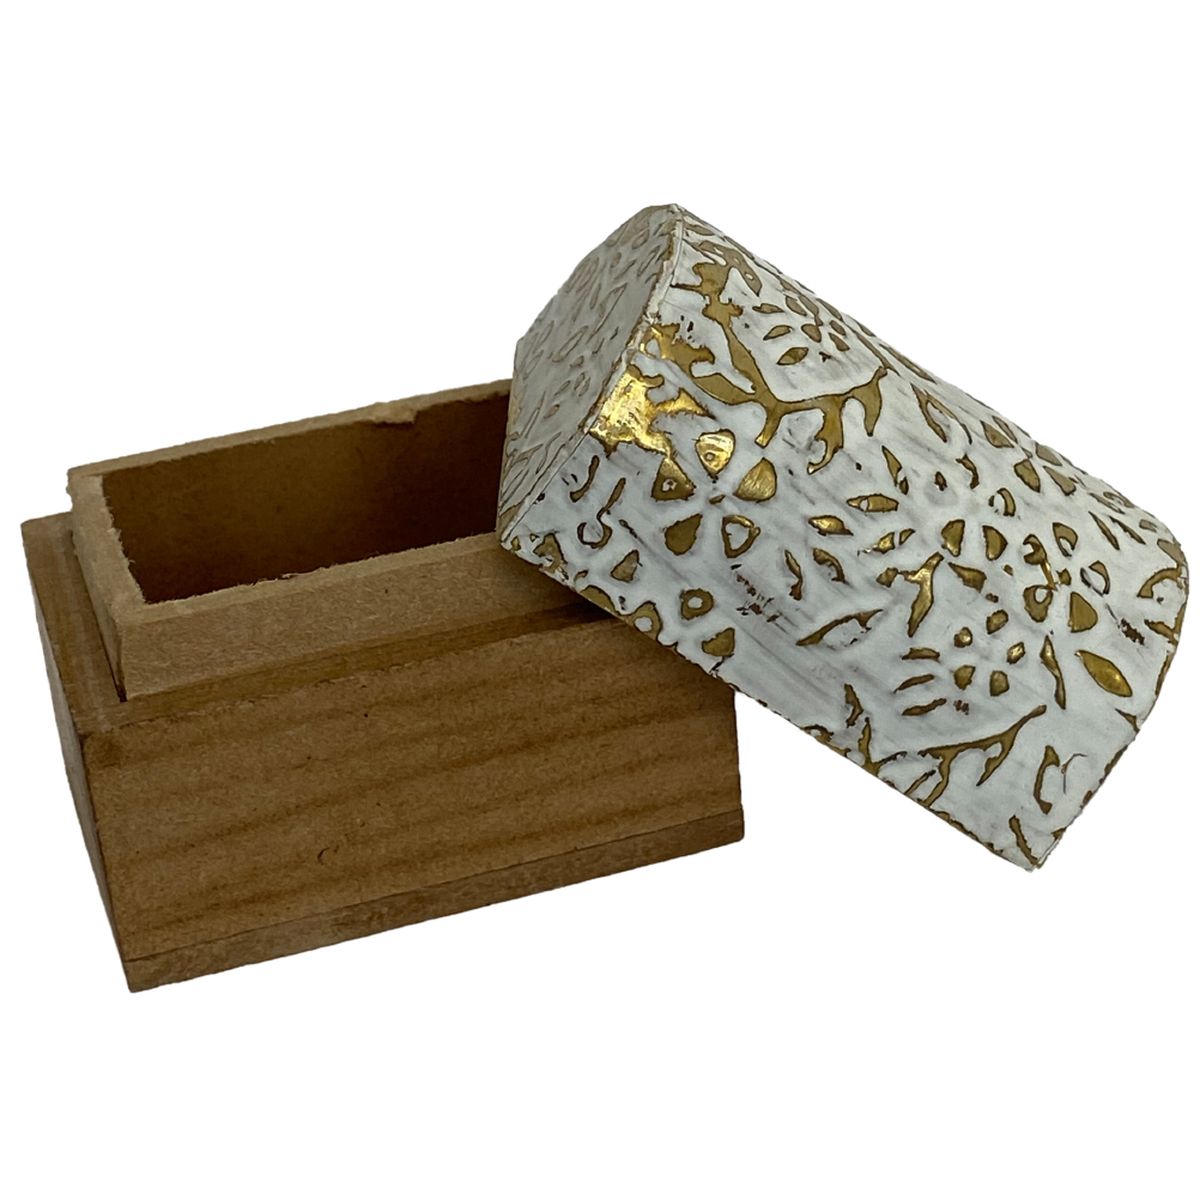 Mini Floral box in white wood and gold